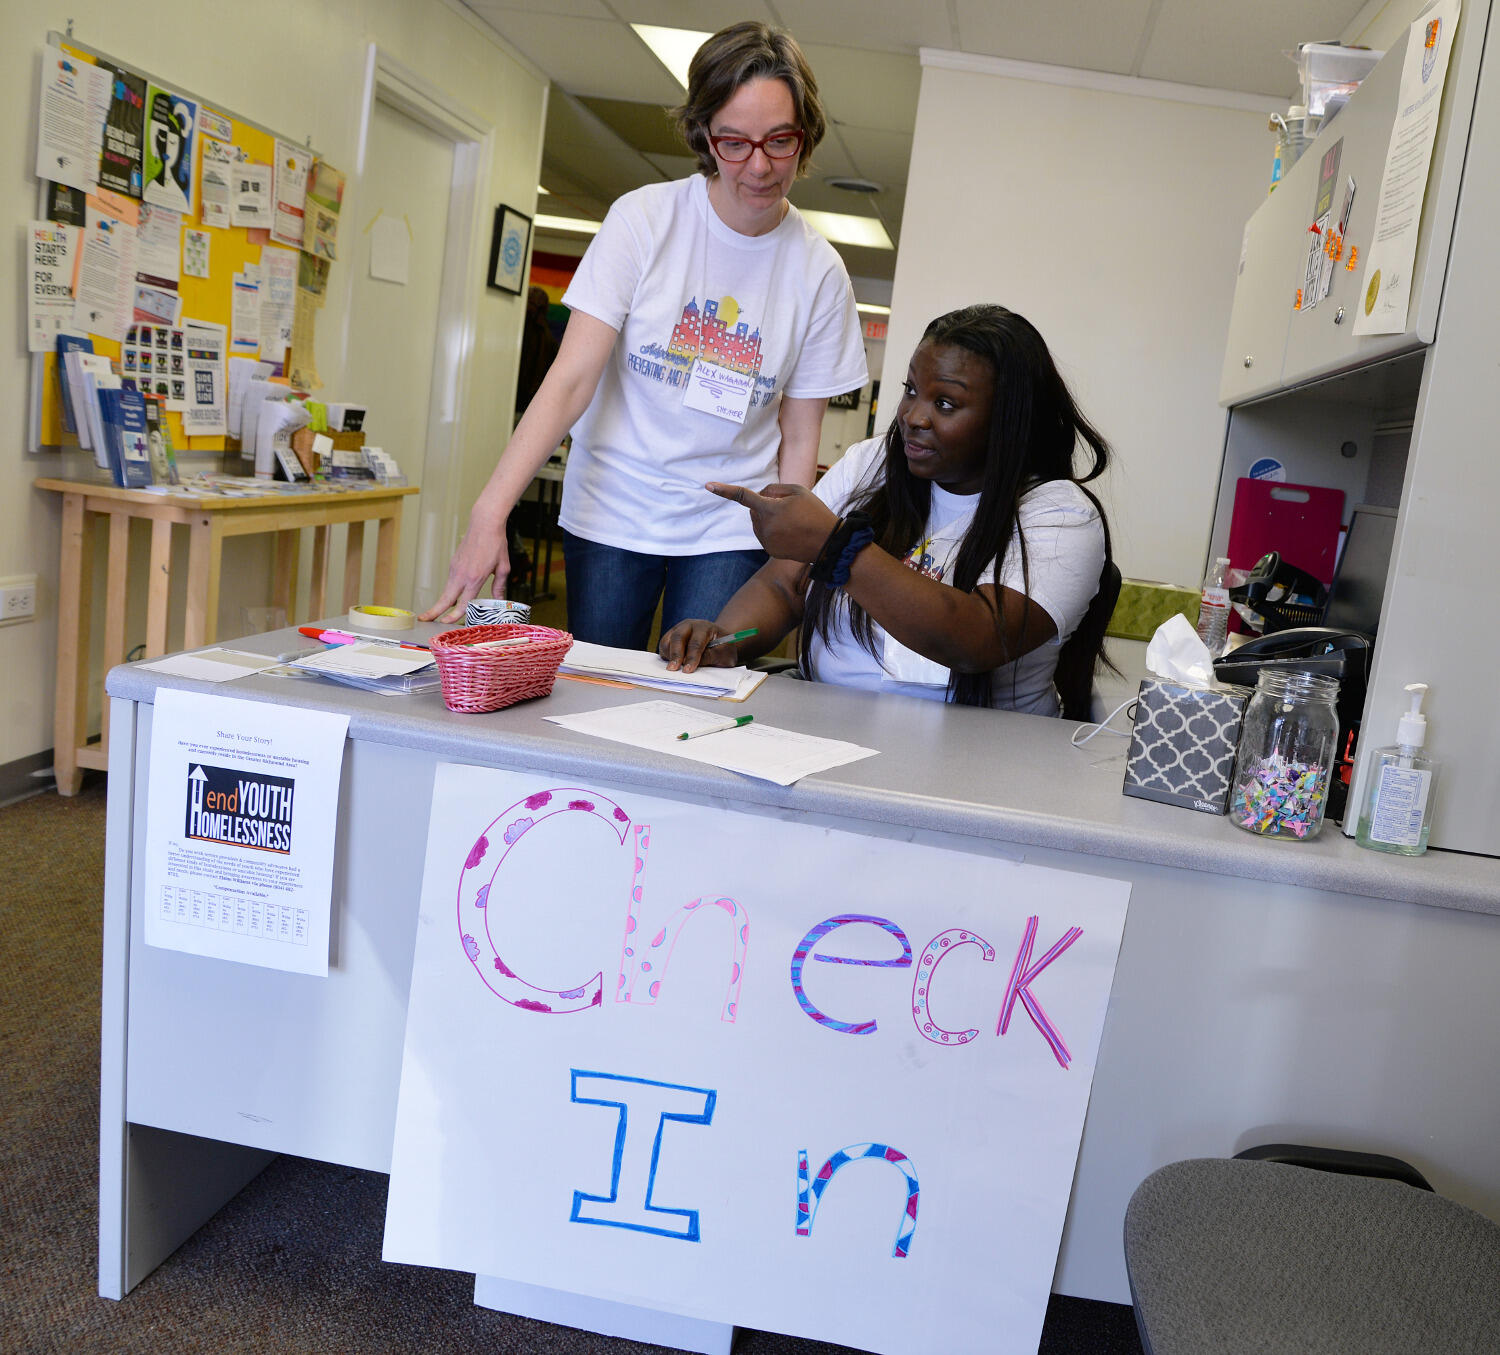 Alex Wagaman, Ph.D., assistant professor in the School of Social Work, and Advocates for Richmond Youth member Tiffany Haynes greet people at the check-in table for the pop-up drop-in center at Side By Side.
